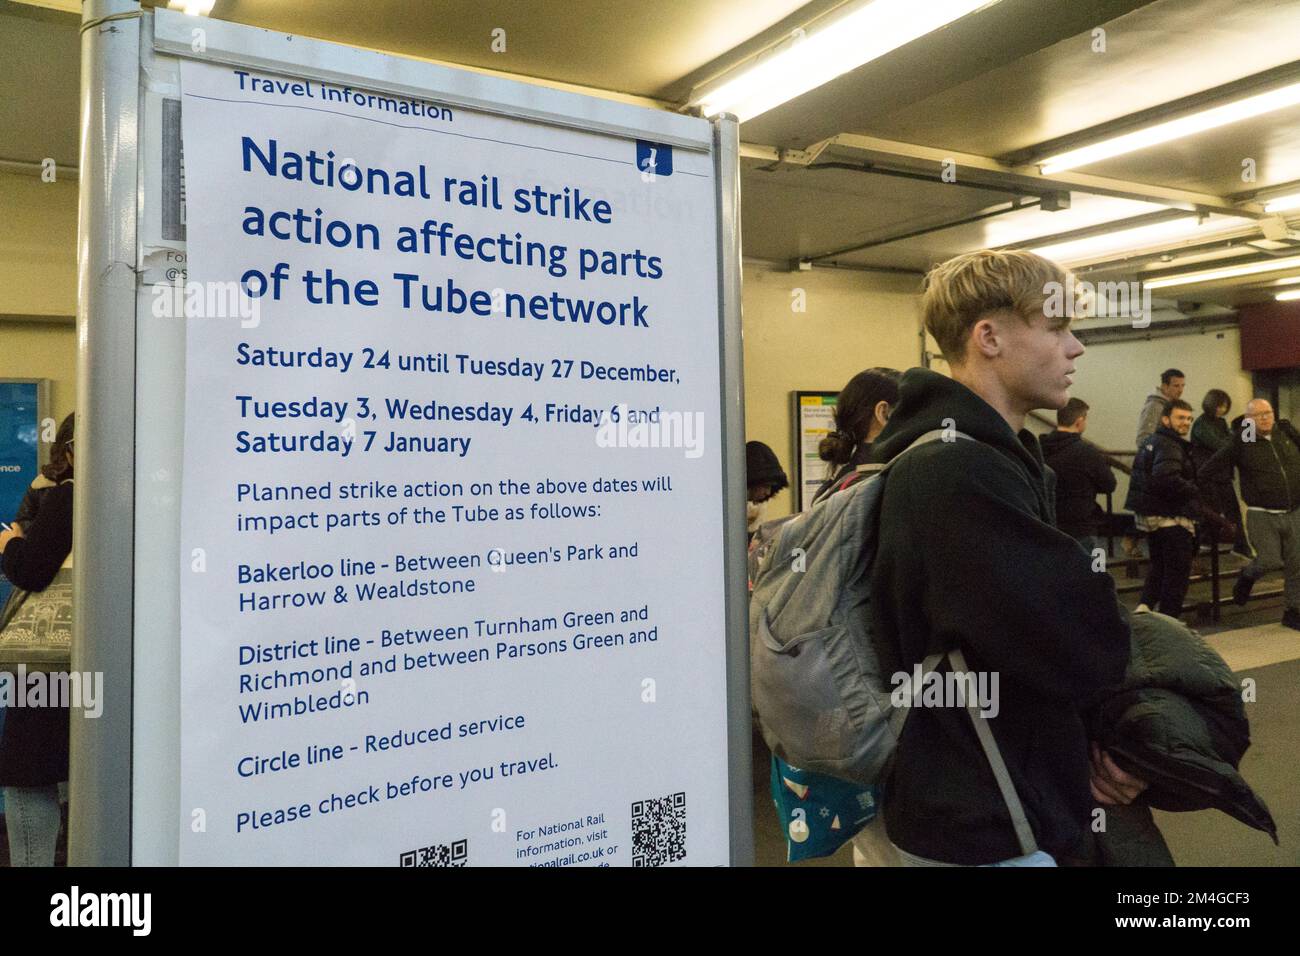 London, UK, 20 December 2022: A poster in South Kensignton tube station warns passengers of upcoming travel disruption due to a national rail strike over the Christmas period. The unions are in dispute with rail companies over pay and working conditions. Anna Watson/Alamy Live News Stock Photo